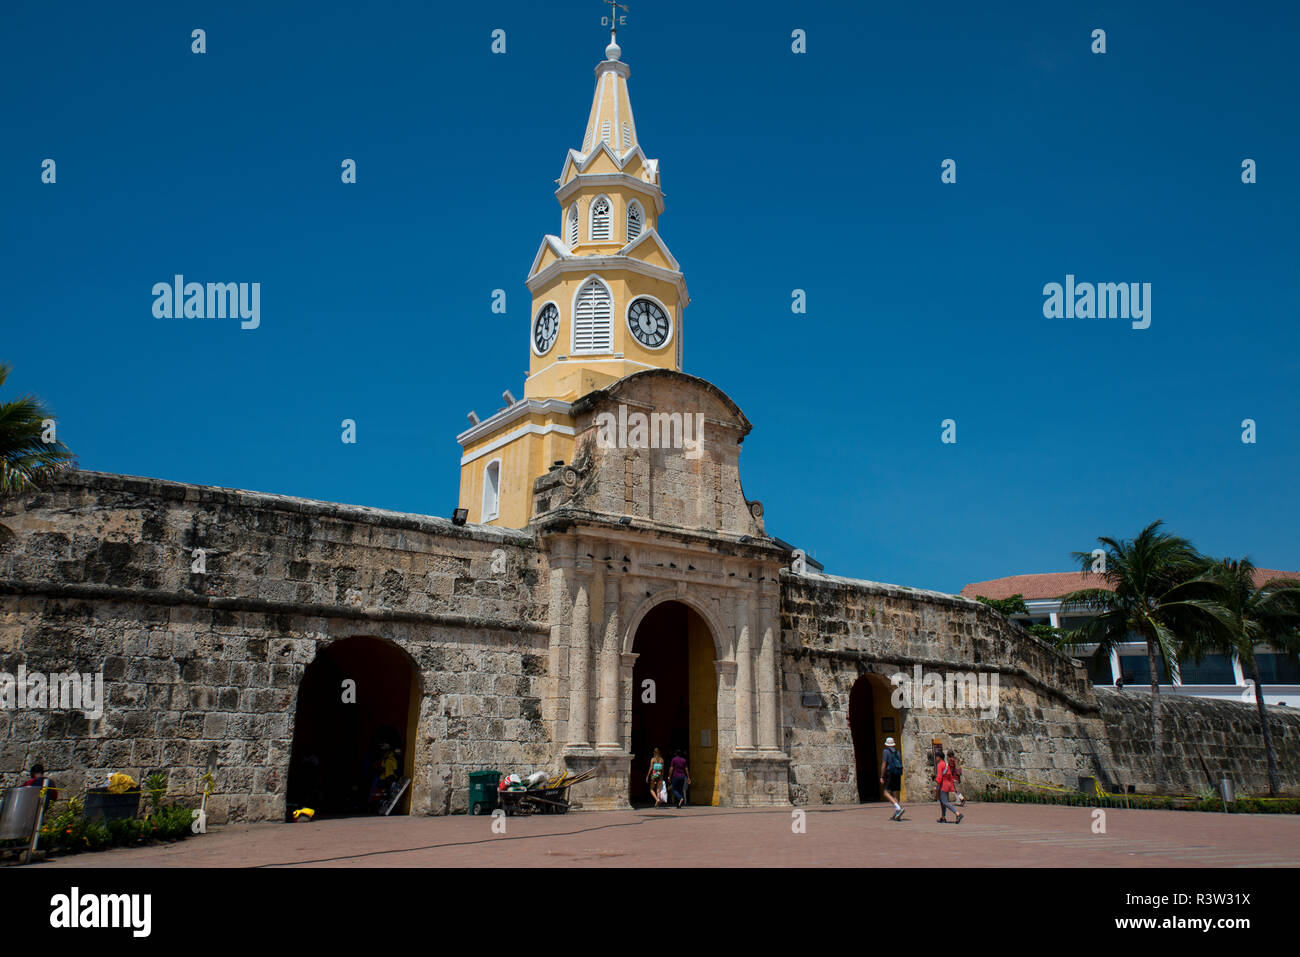 South America, Colombia, Cartagena. 'Old City' the historic walled city center, UNESCO. Clock Tower Gate, aka Torre del Reloj. Stock Photo